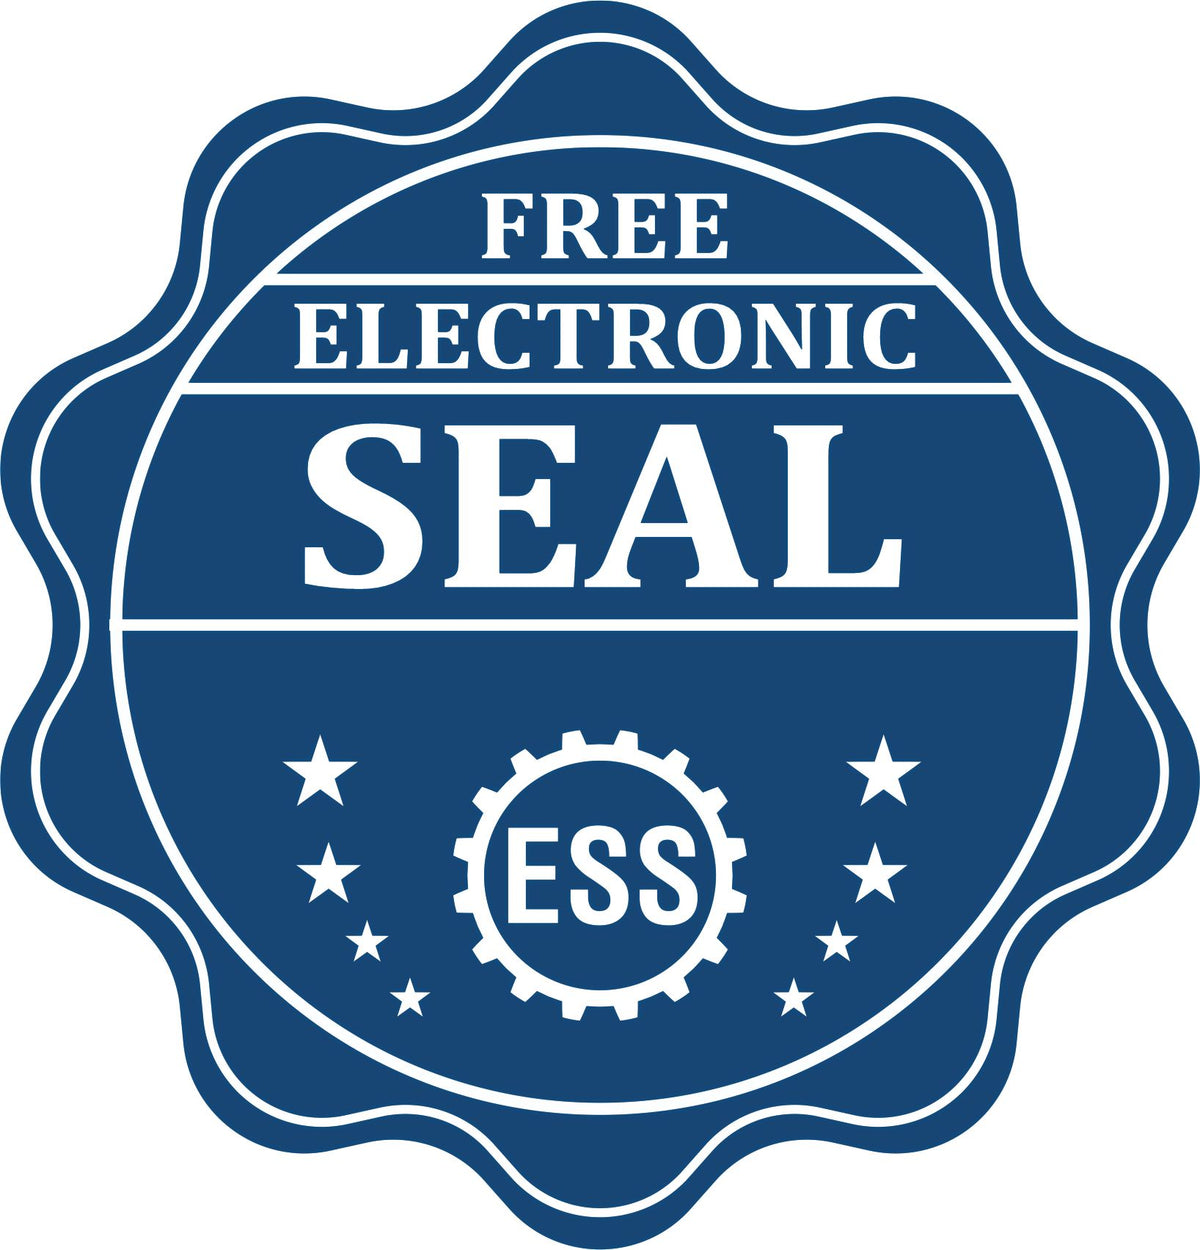 A badge showing a free electronic seal for the Soft Pocket Delaware Landscape Architect Embosser with stars and the ESS gear on the emblem.